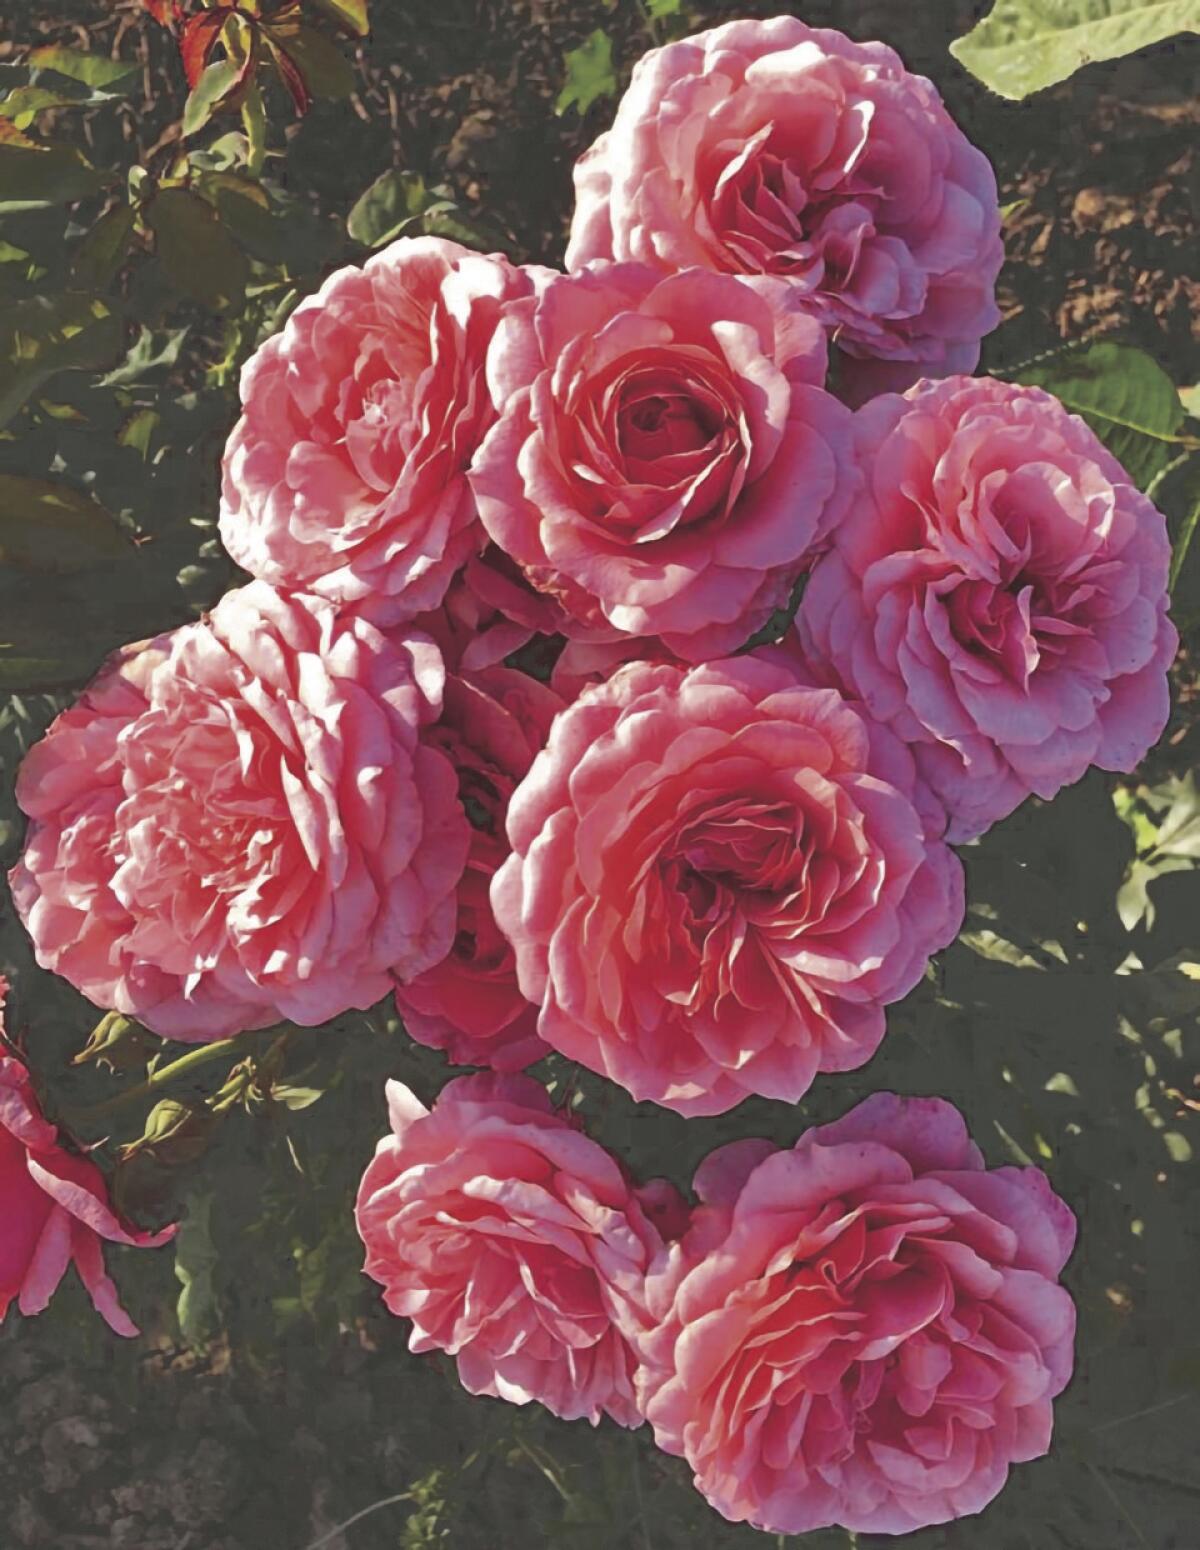 ‘Uptown Girl’ has old-fashioned, warm coral-pink blooms with a deep, orange-toned interior.